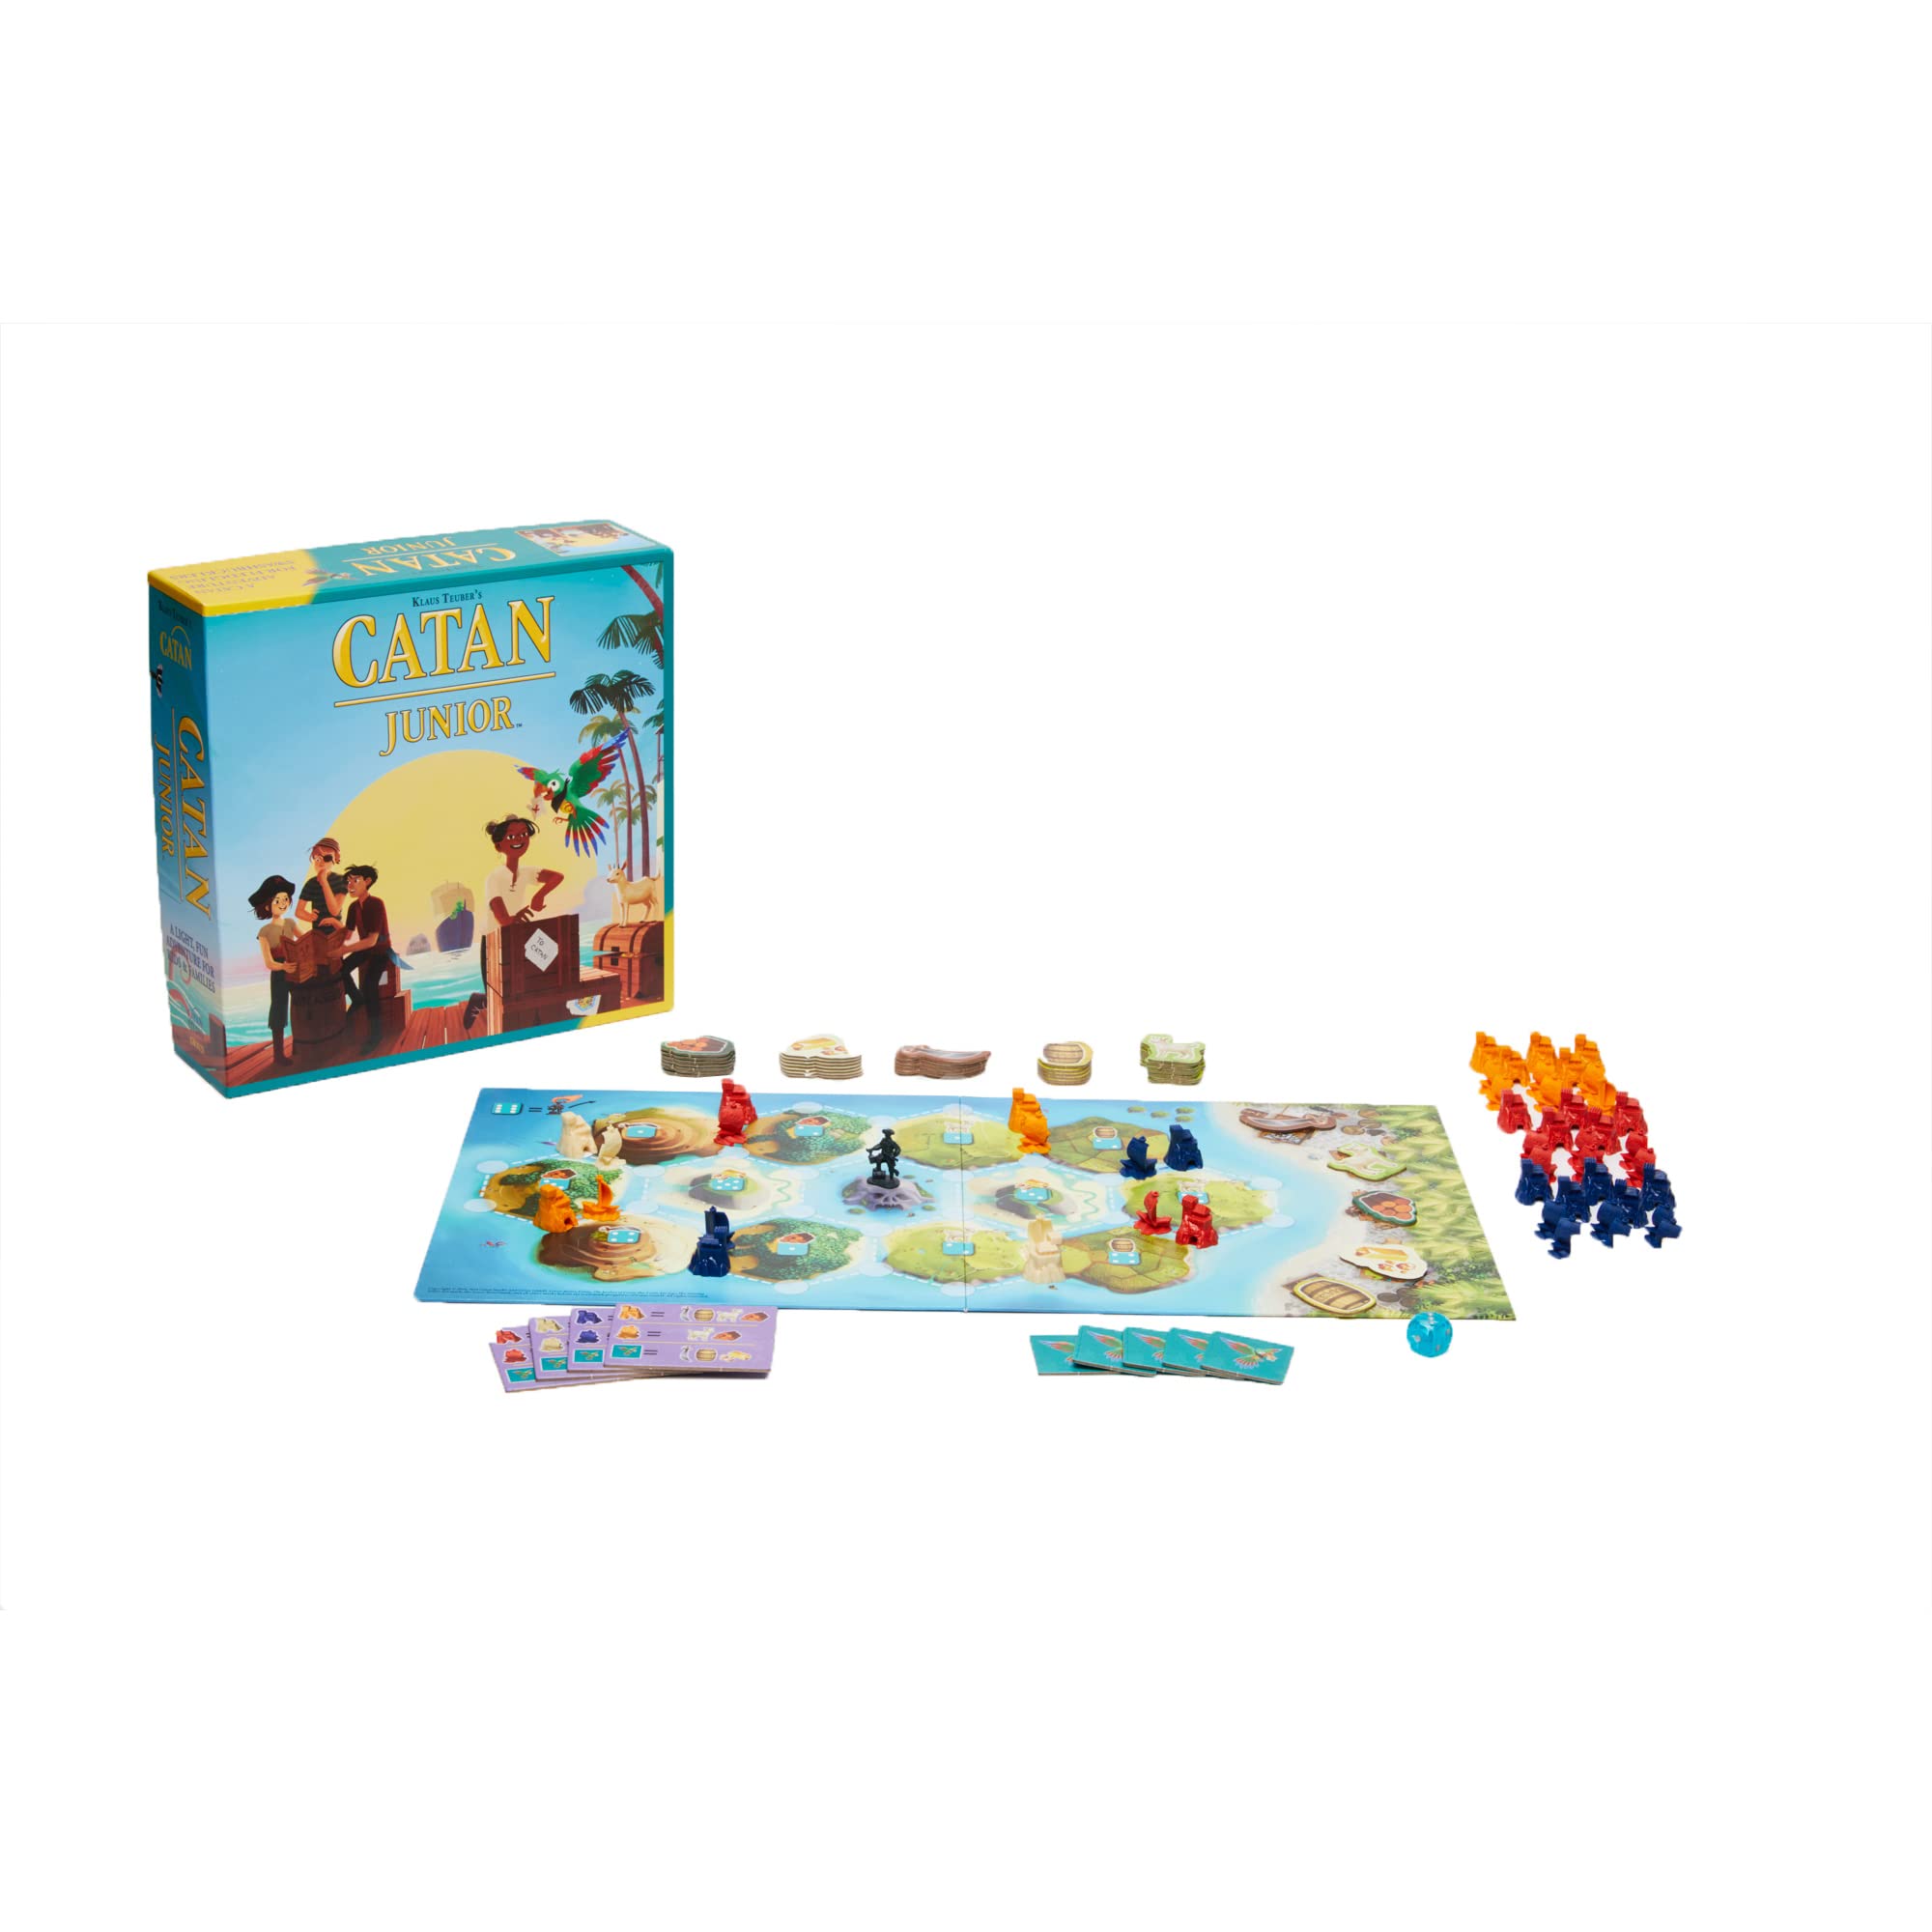 CATAN Junior Board Game | Board Game for Kids | Strategy Game for Kids | Family Board Game | Adventure Game for Kids | Ages 6+ | For 2 to 4 players | Average Playtime 30 minutes